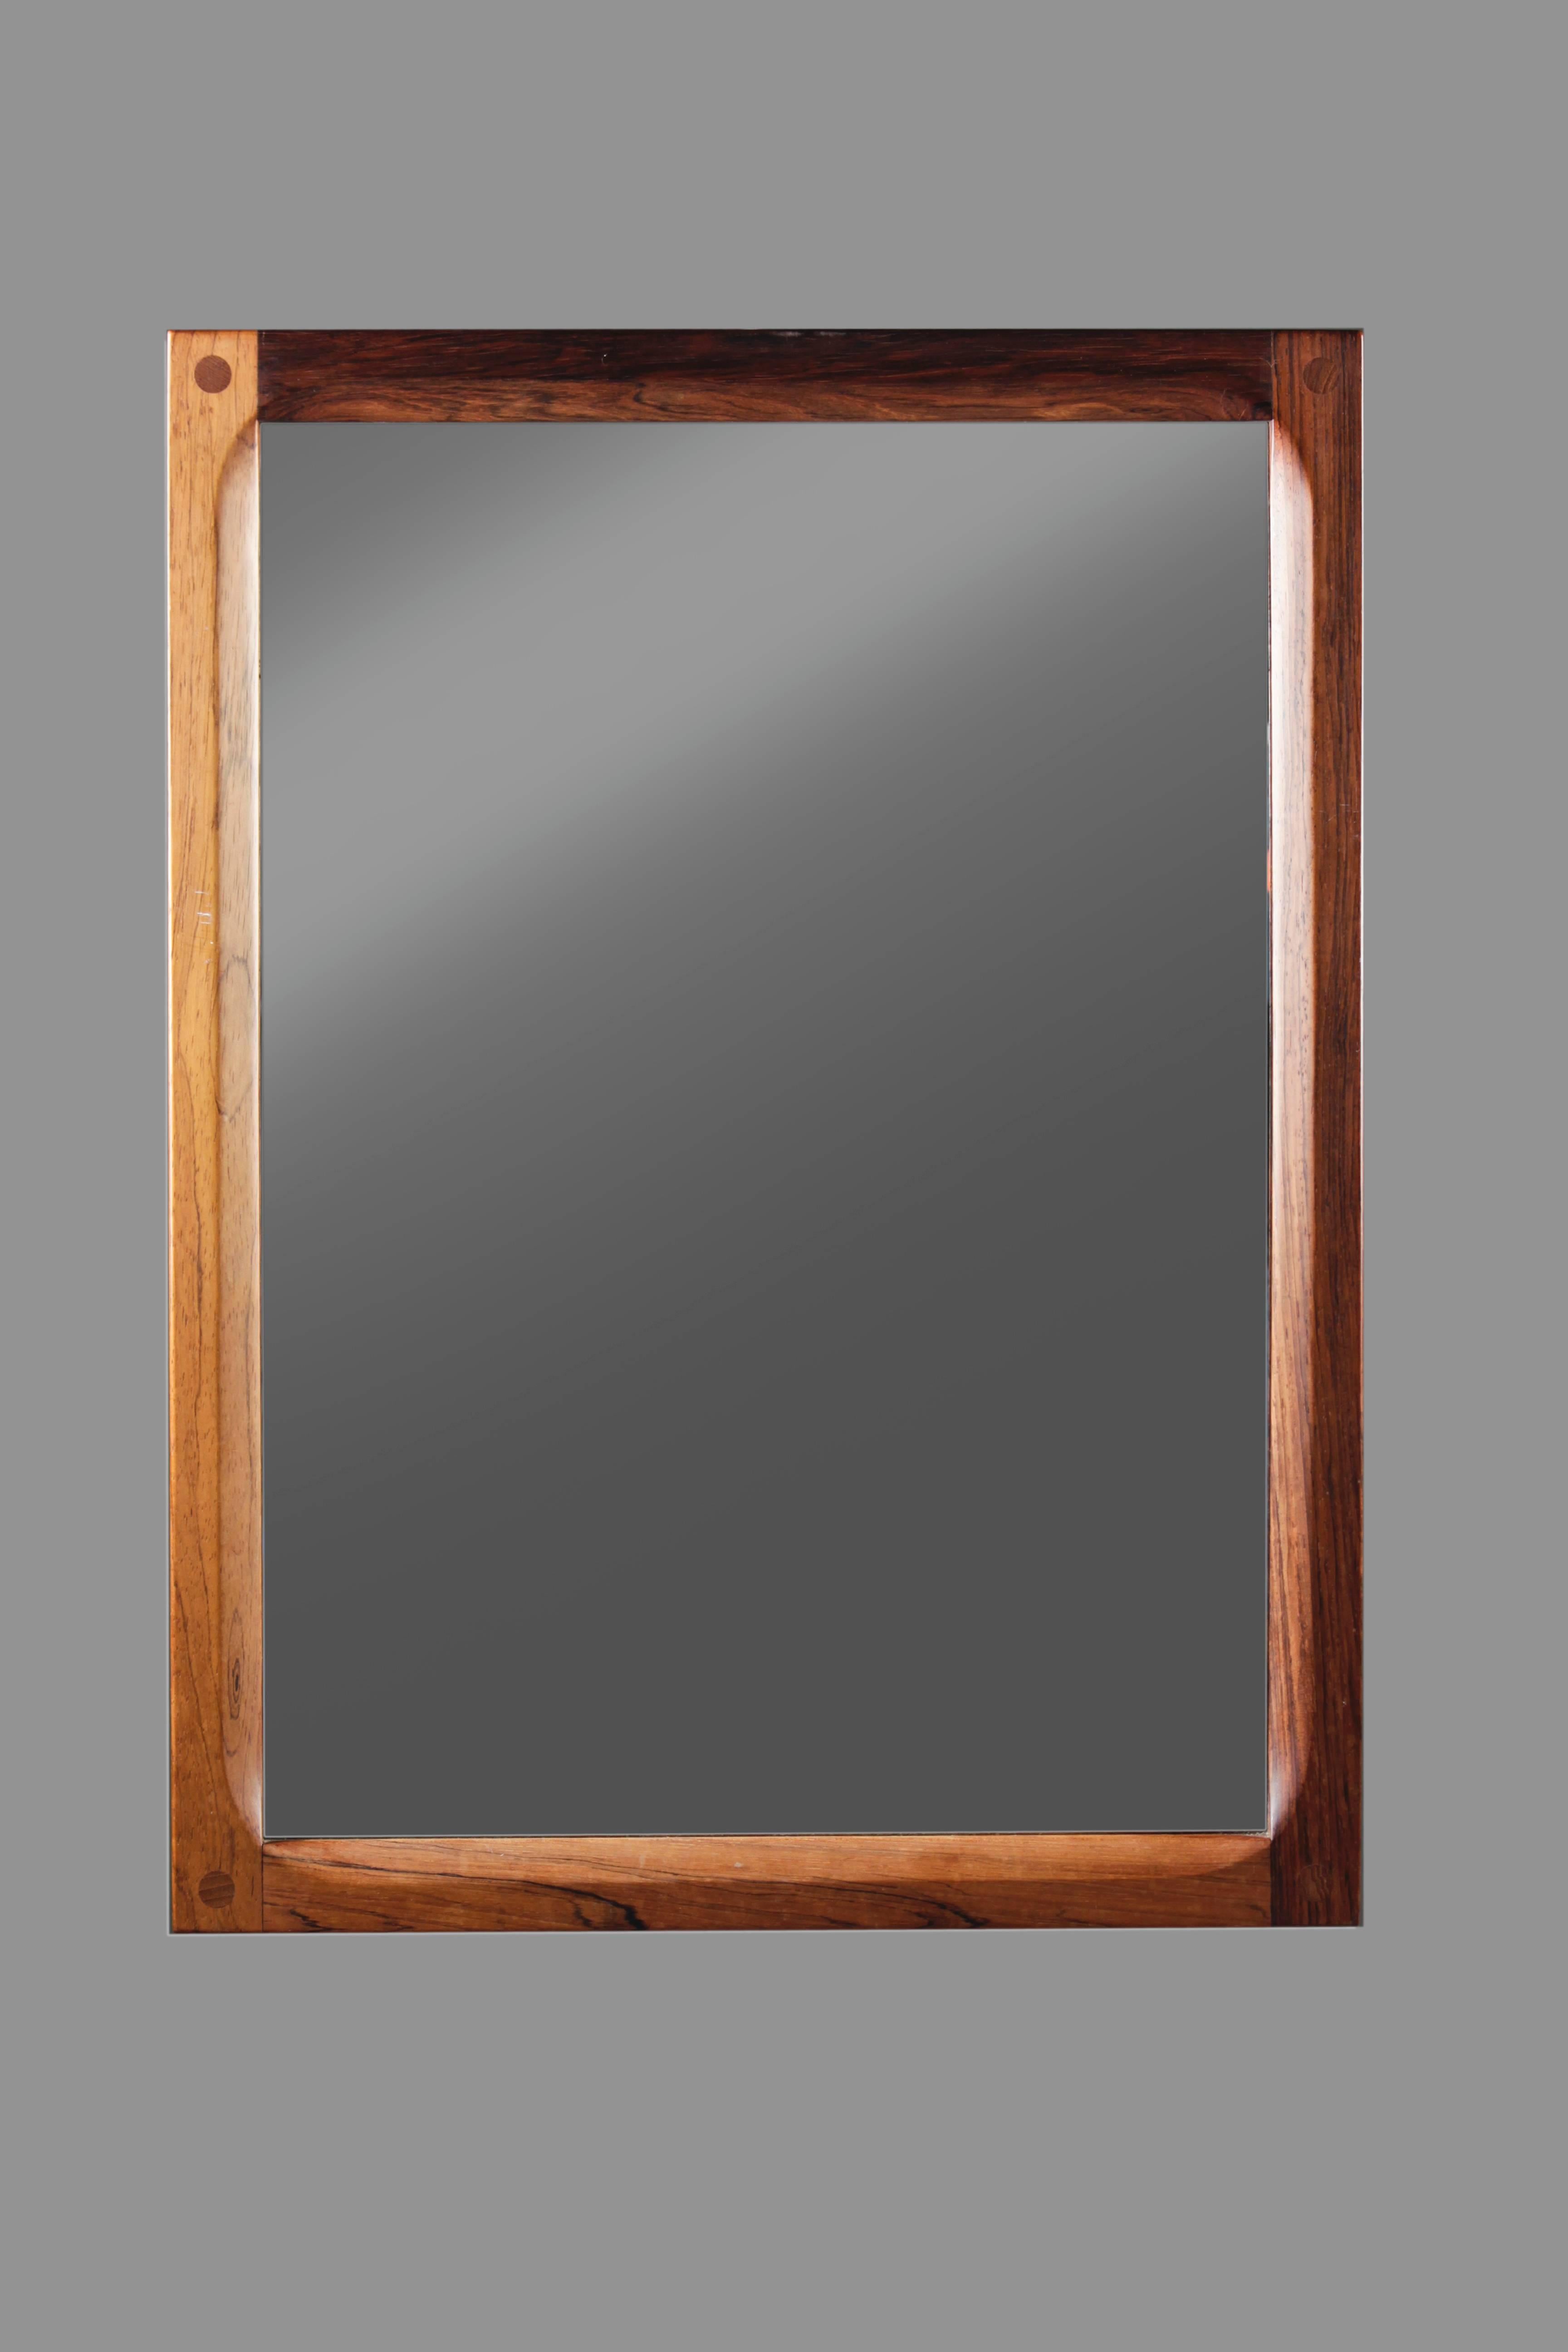 Wall mirror with a beautifully carved frame in rosewood by Danish designer Aksel Kjersgaard.
On the photographs the difference in the color of the wood seems very big. In 